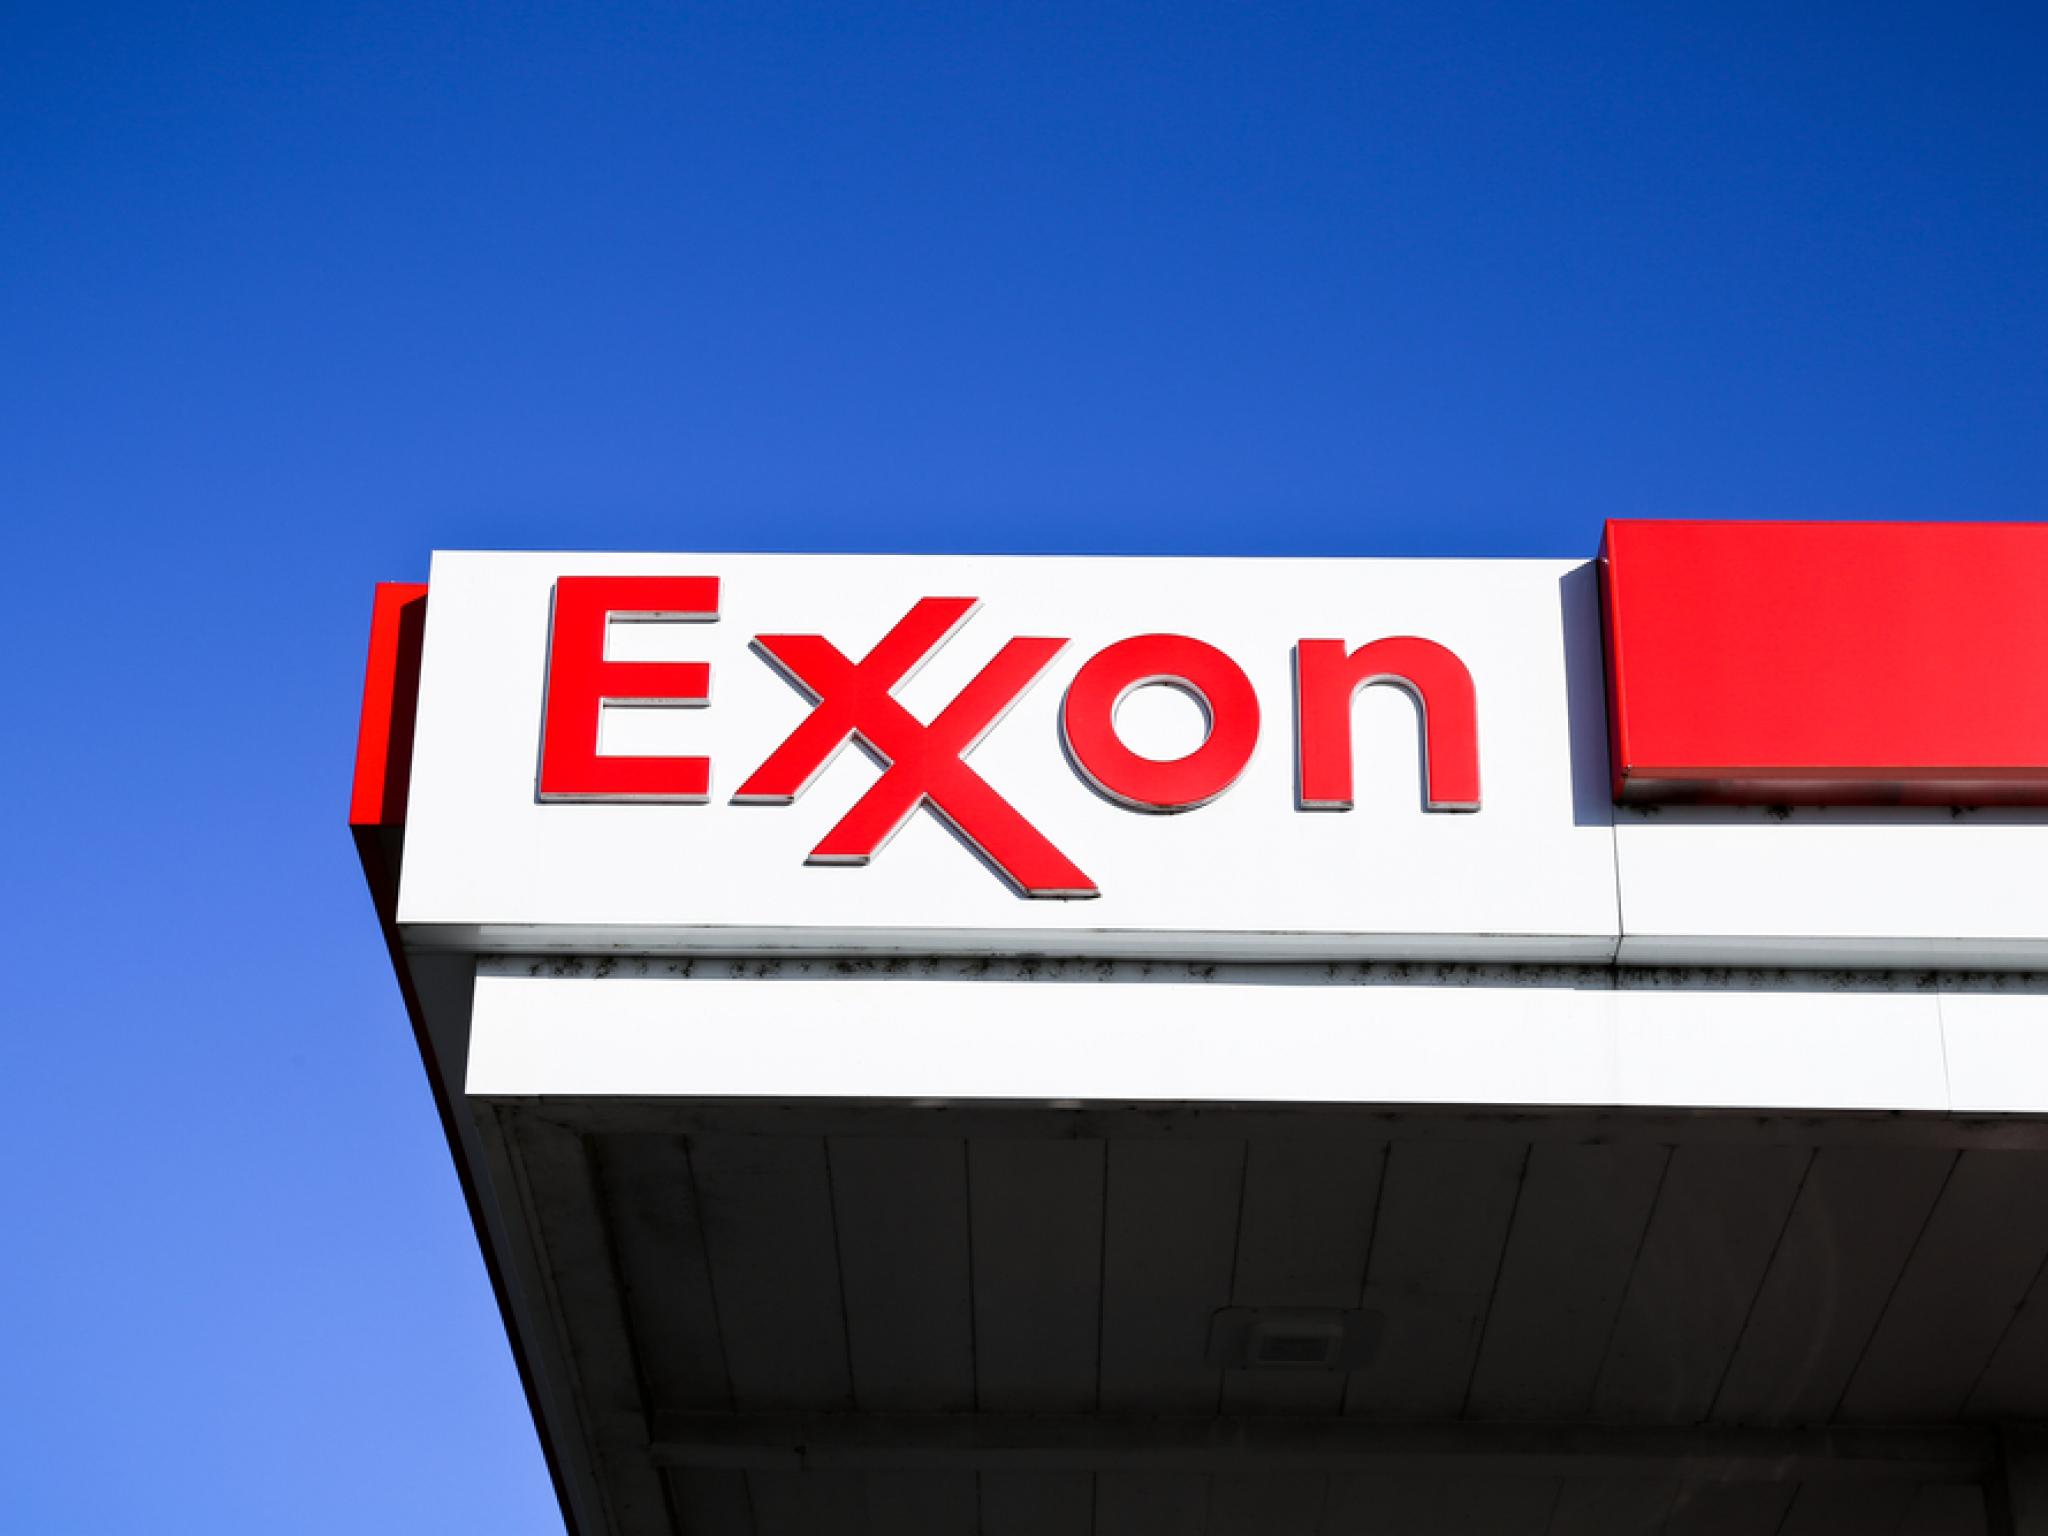  shell-and-exxon-eye-north-sea-asset-sales-in-500m-deal-report 